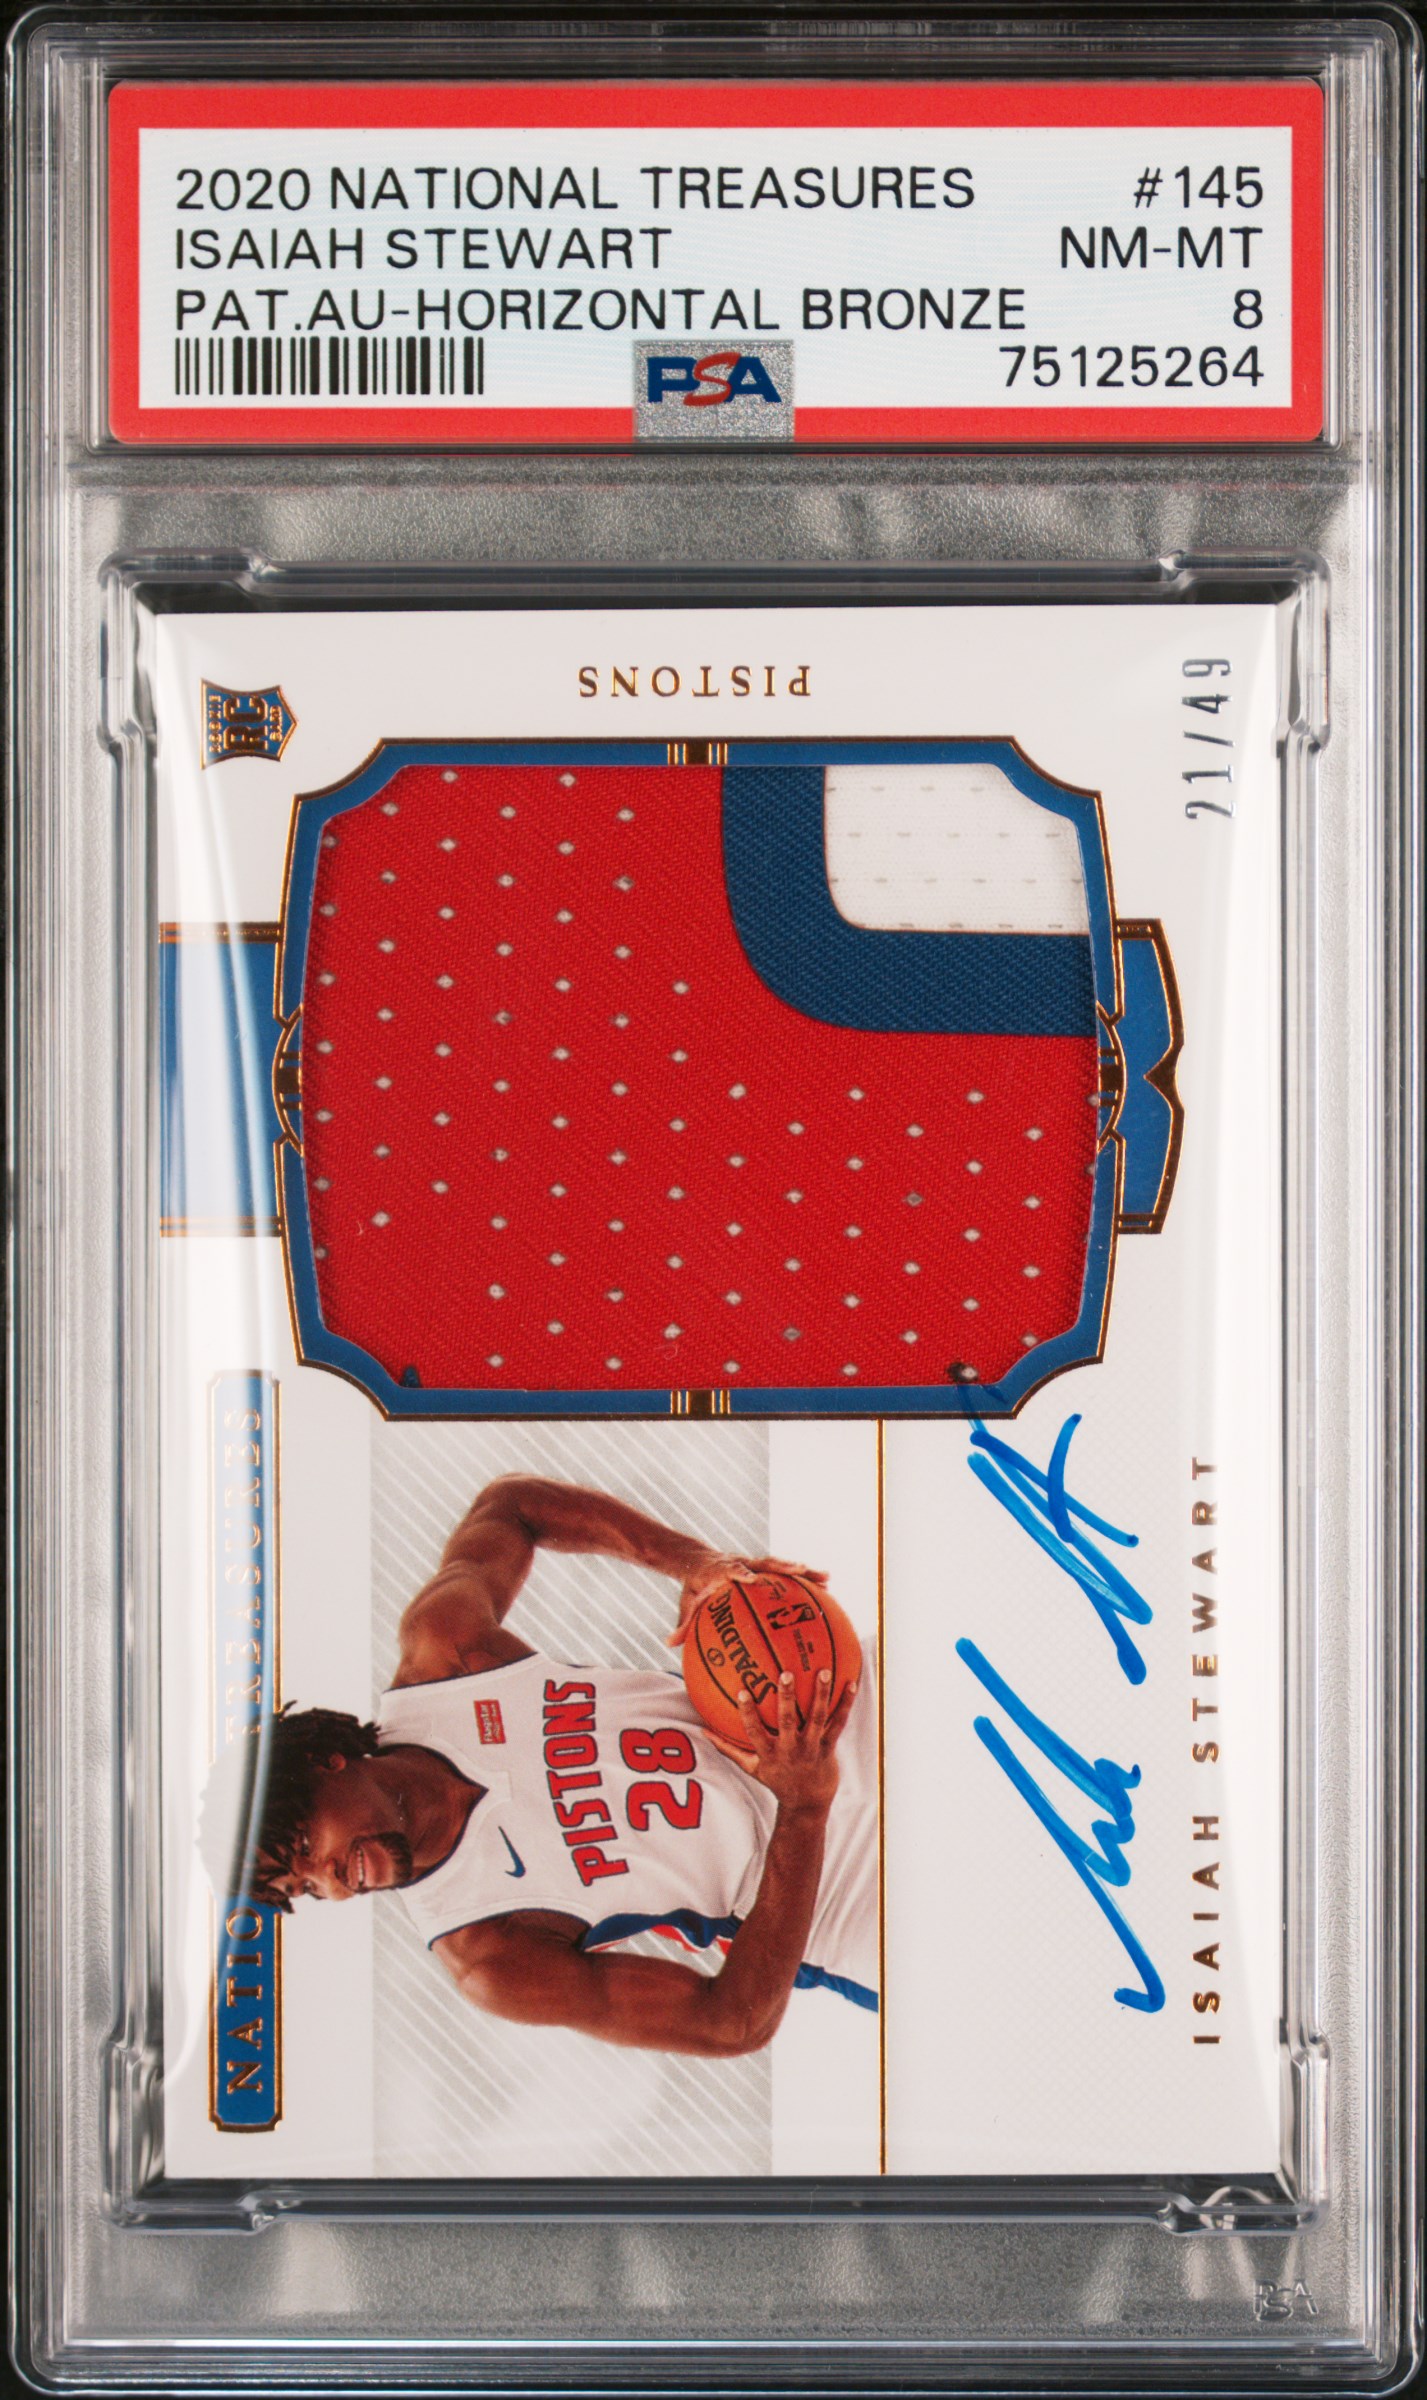 2020-21 Panini National Treasures Rookie Patch Autograph (RPA) Horizontal Bronze #145 Isaiah Stewart Signed Patch Rookie Card (#21/49) - PSA NM-MT 8